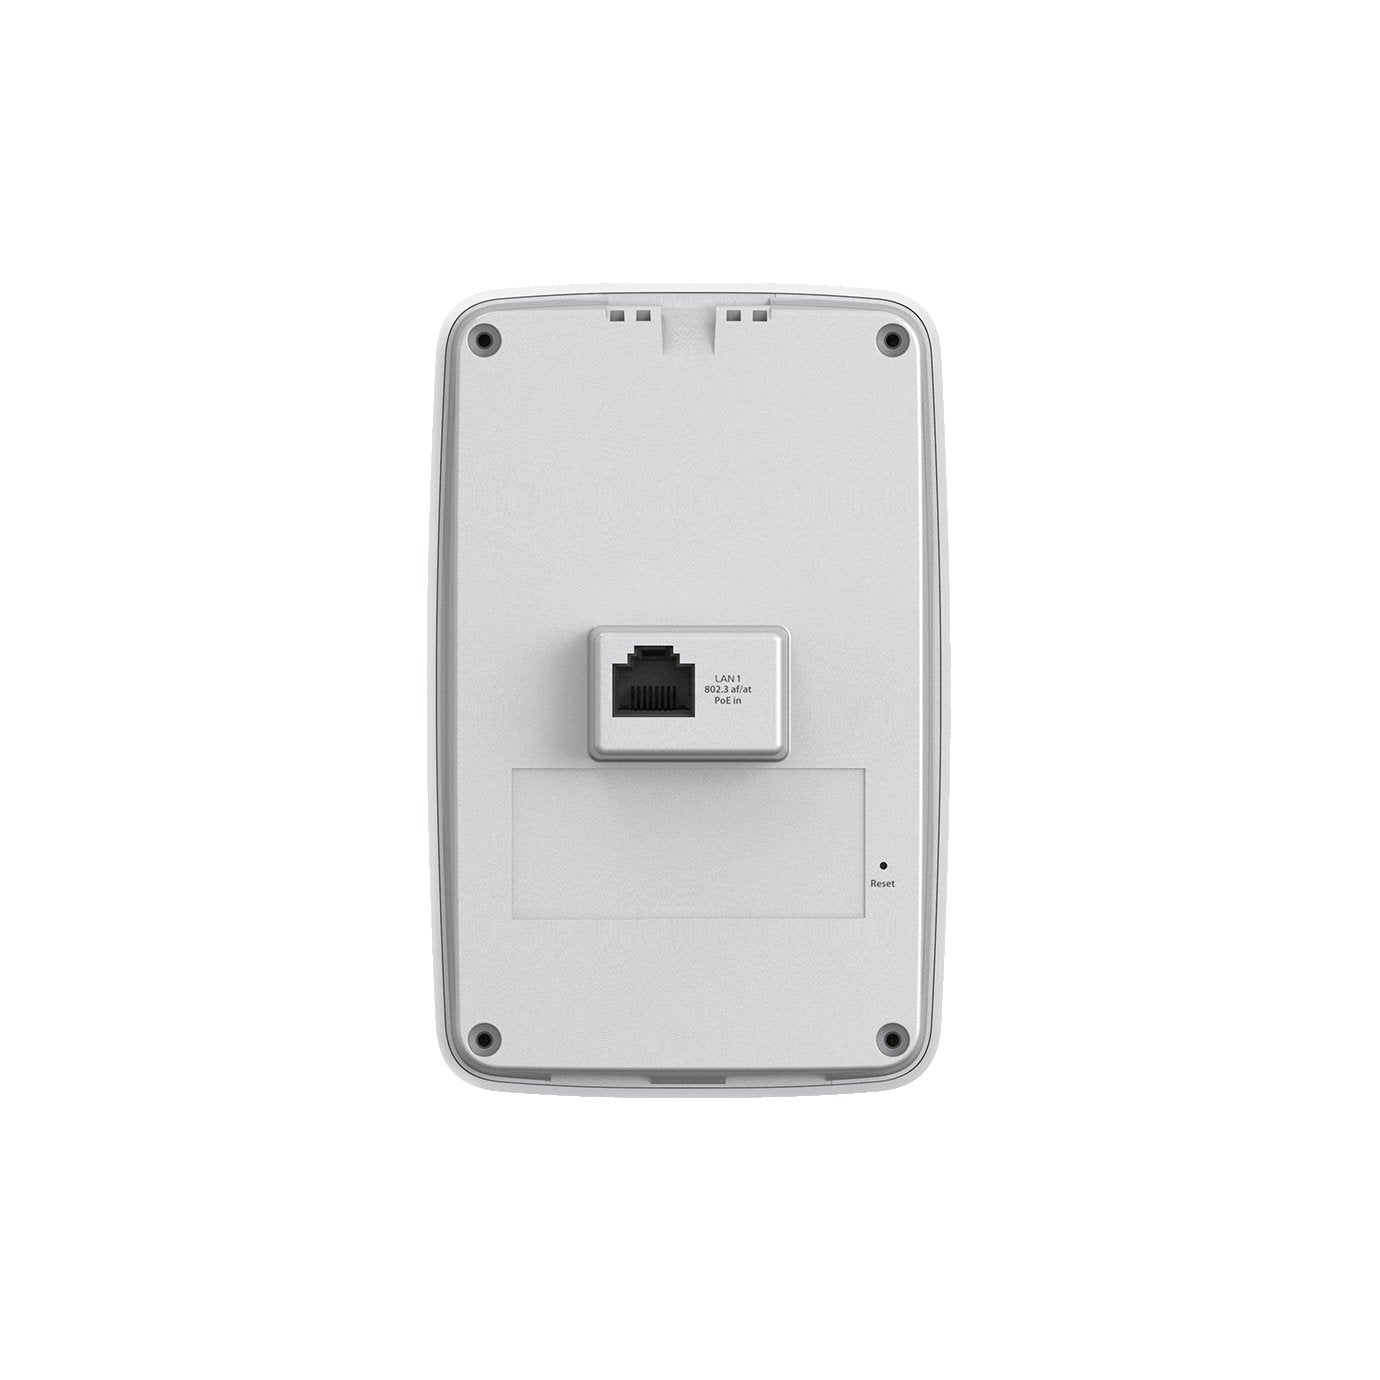 Engenius ECW215 Wi-Fi 6 Cloud Managed Wall-Plate Access Point - Blue Wireless Store